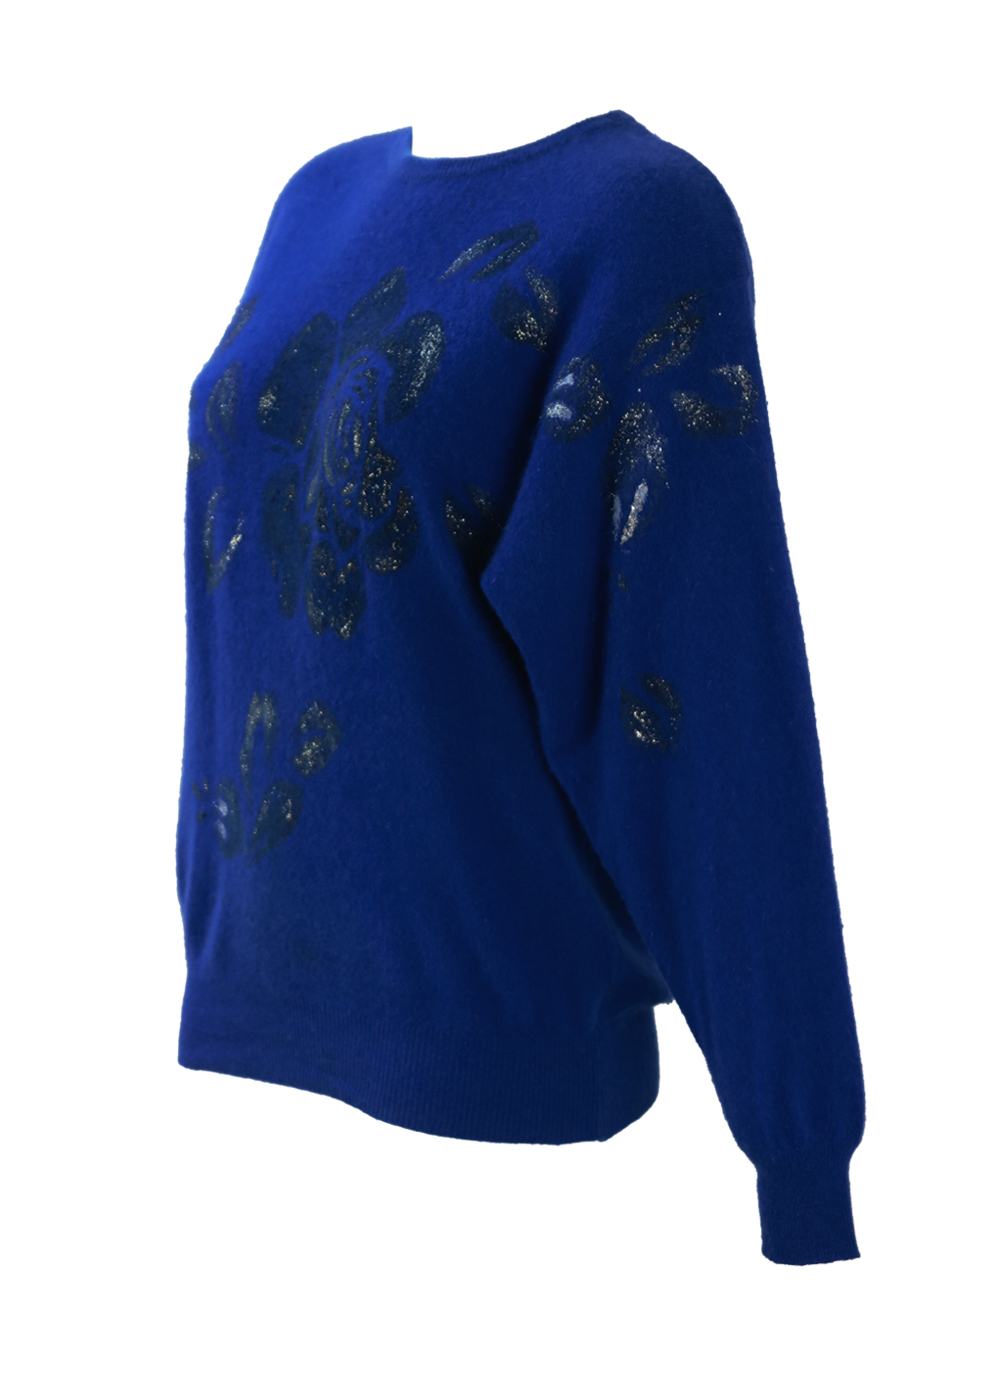 Electric Blue Jumper with Hand Painted Silver Glitter Rose Design - S/M ...